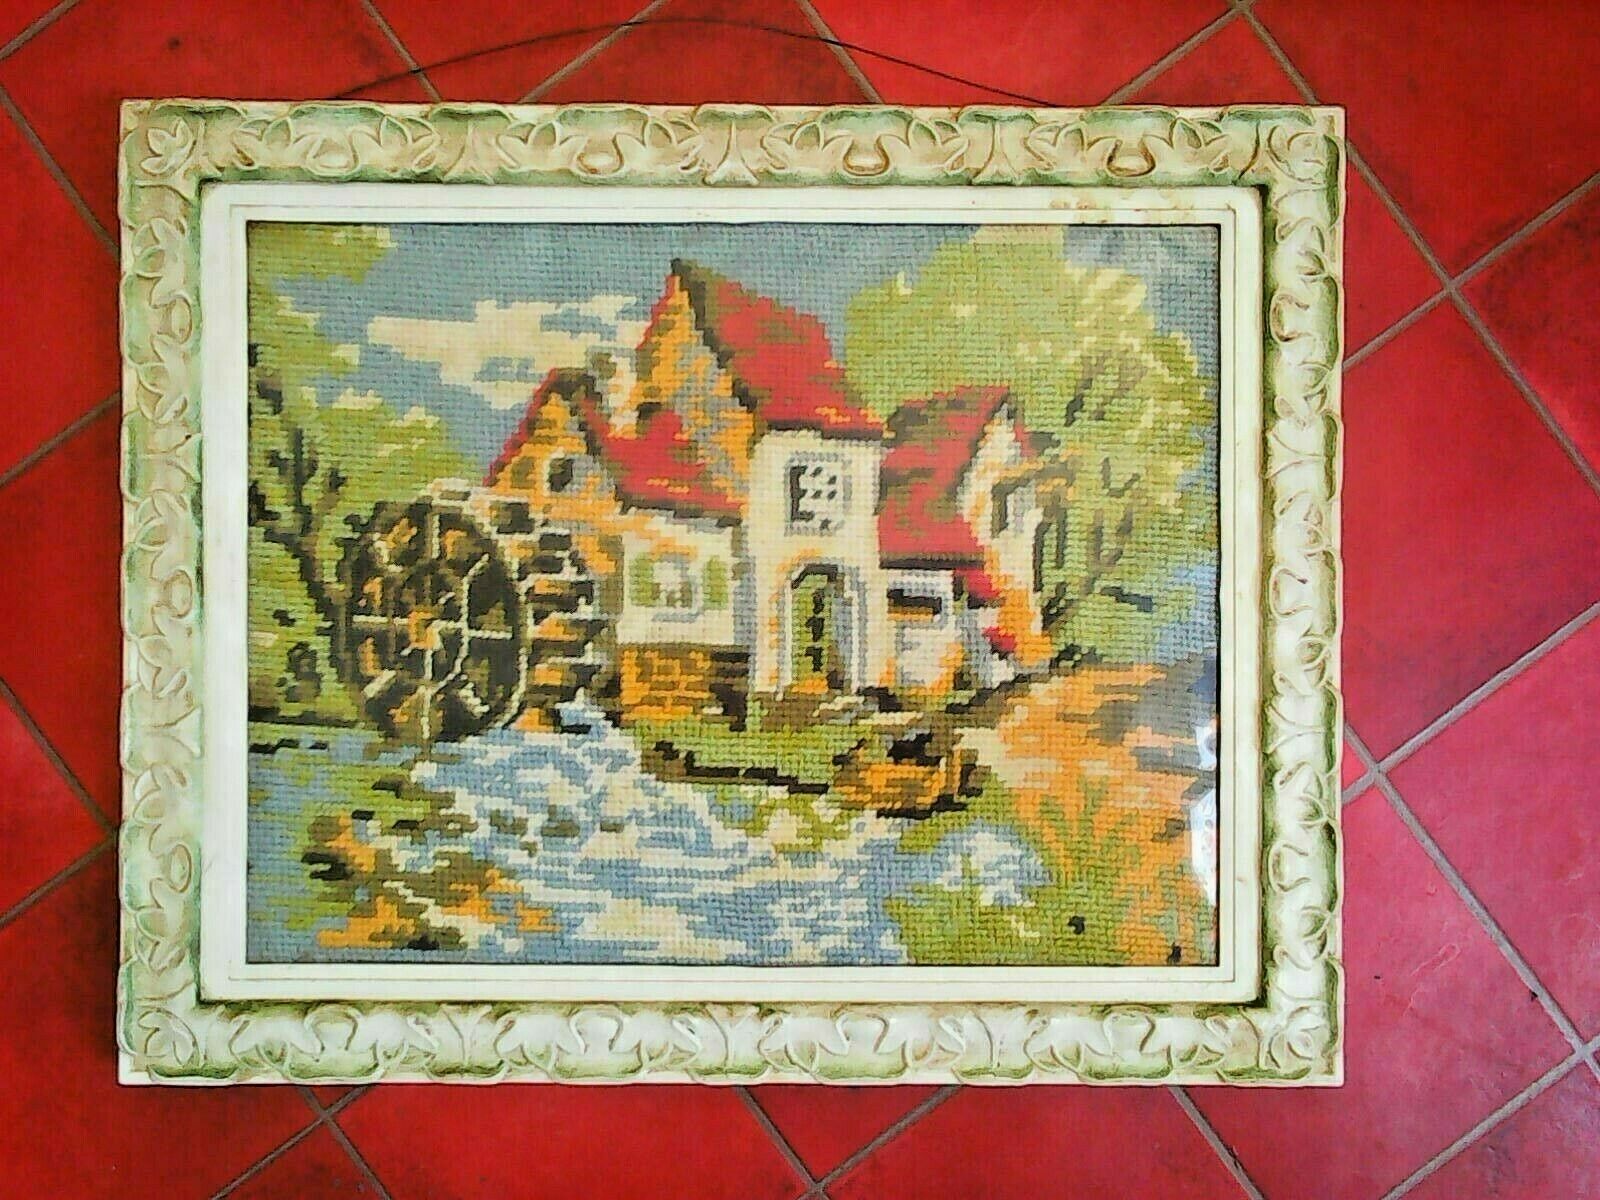 Vintage tapestry framed wall hanging circa 1960's water wheel cottage scene